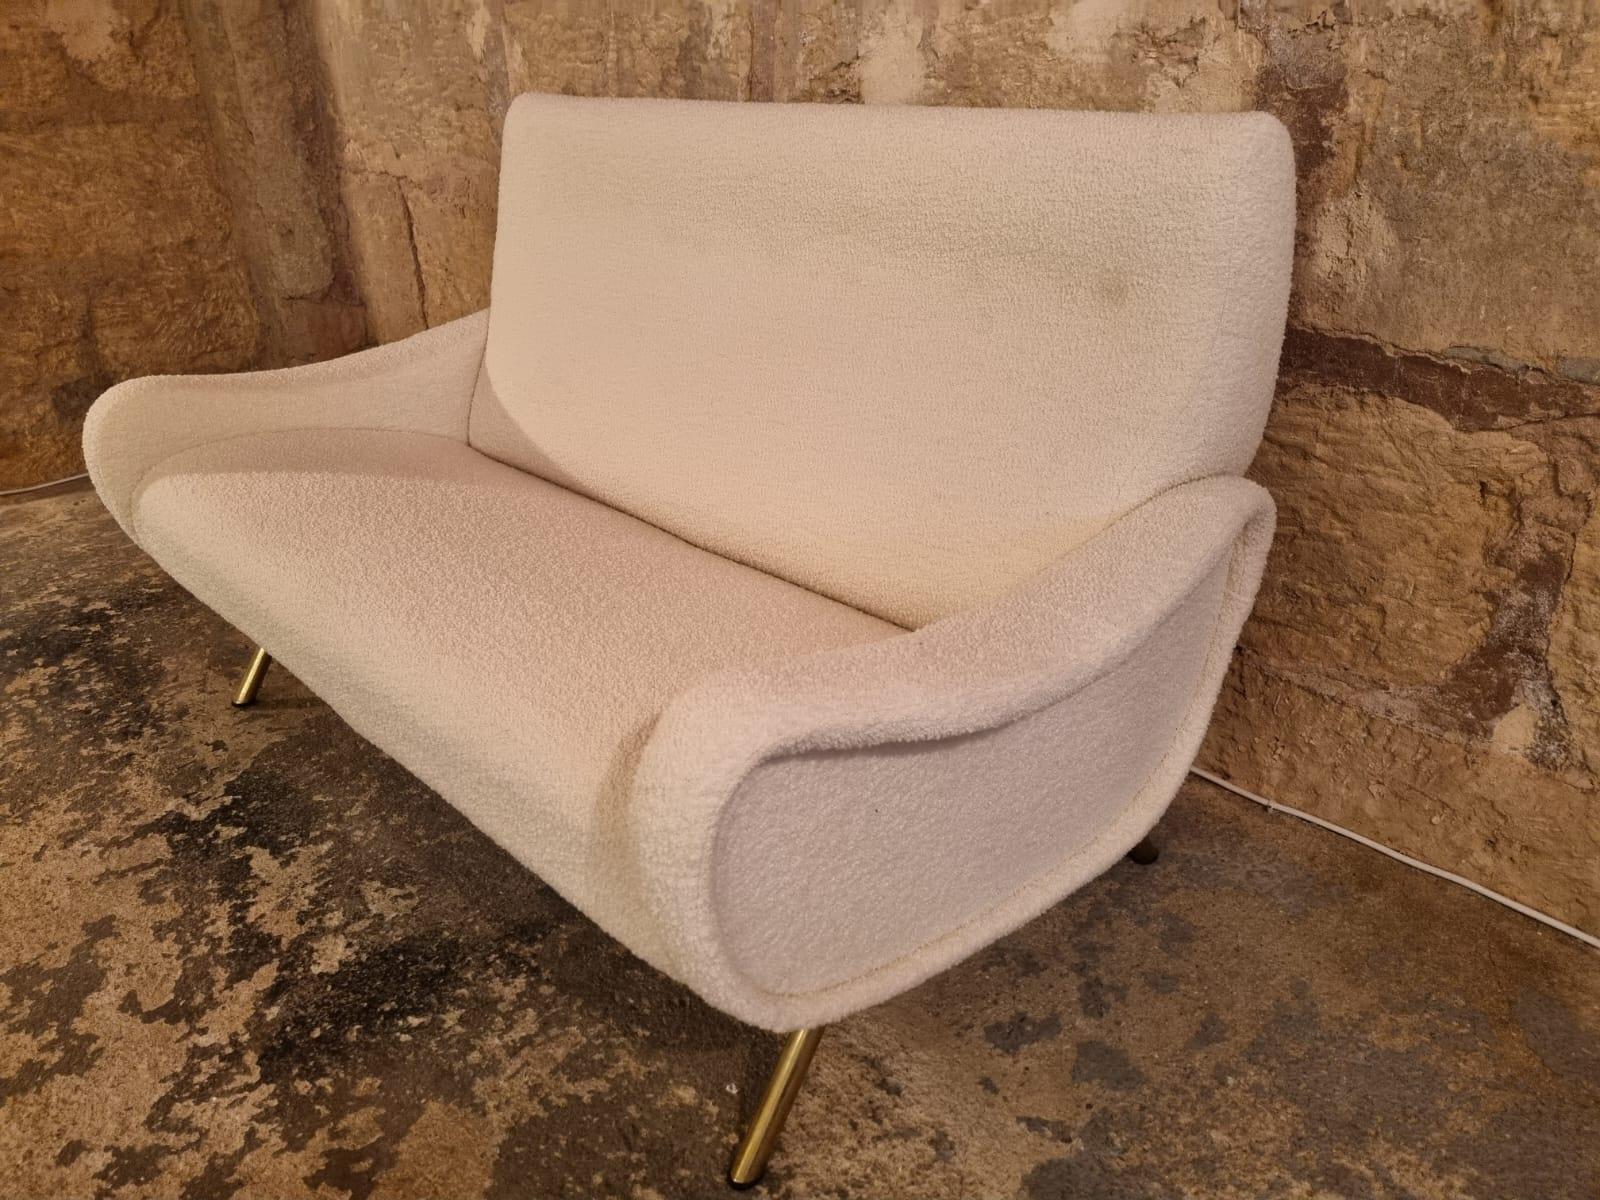 Lady Sofa or Love seat by designer Marco Zanusso from the 1950s for Arflex.
Completely restored to the highest quality with a beautiful cream-colored looped (Bouclé) fabric by French Bisson Bruneel, ALSO two Lady Chairs available for sale in a